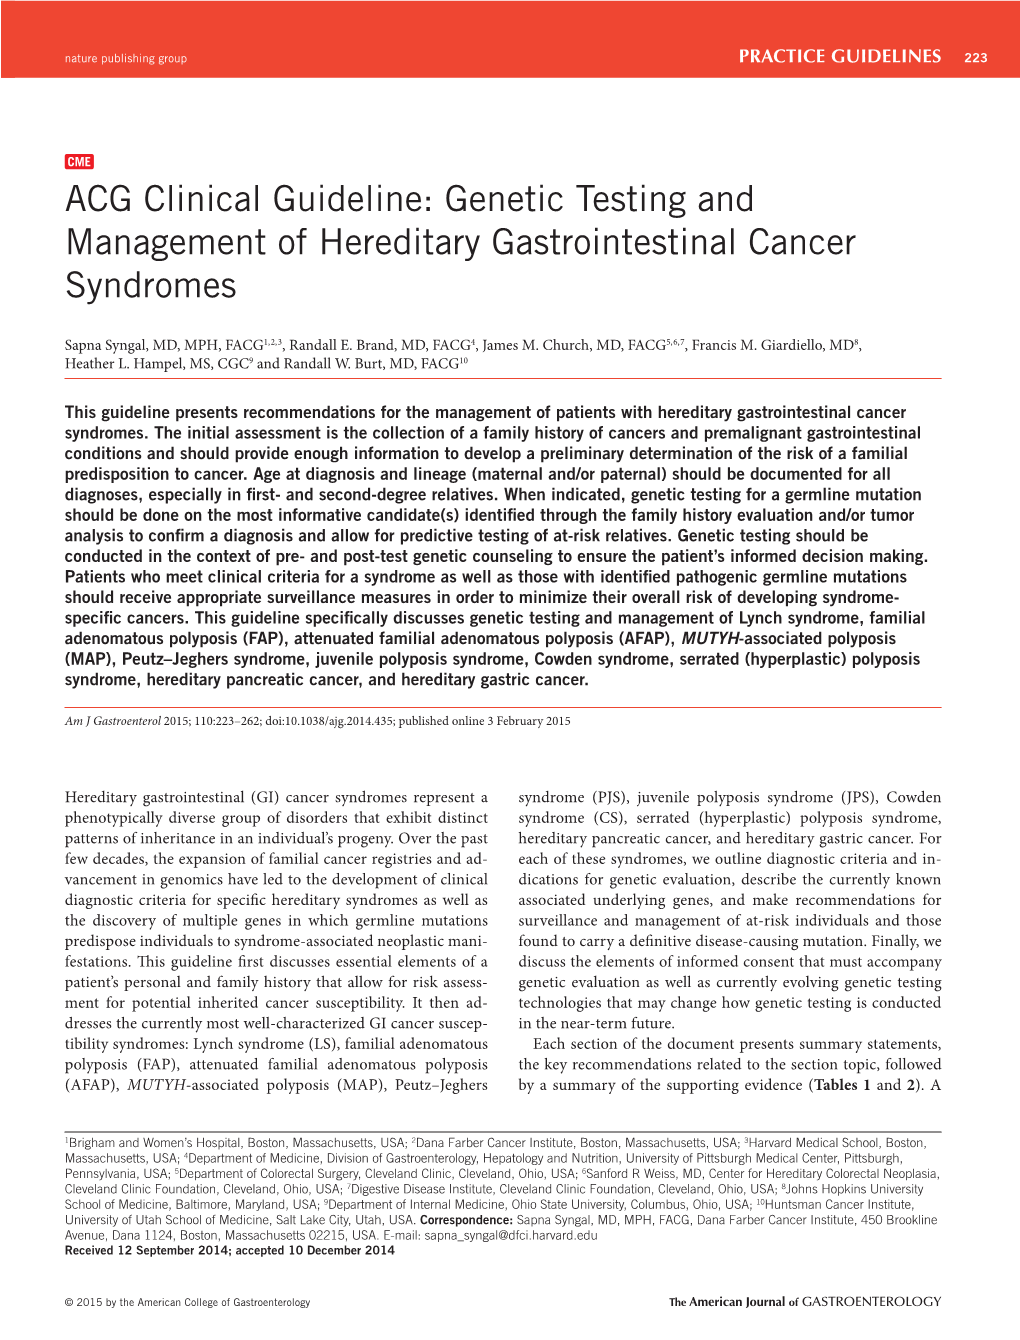 Genetic Testing and Management of Hereditary Gastrointestinal Cancer Syndromes